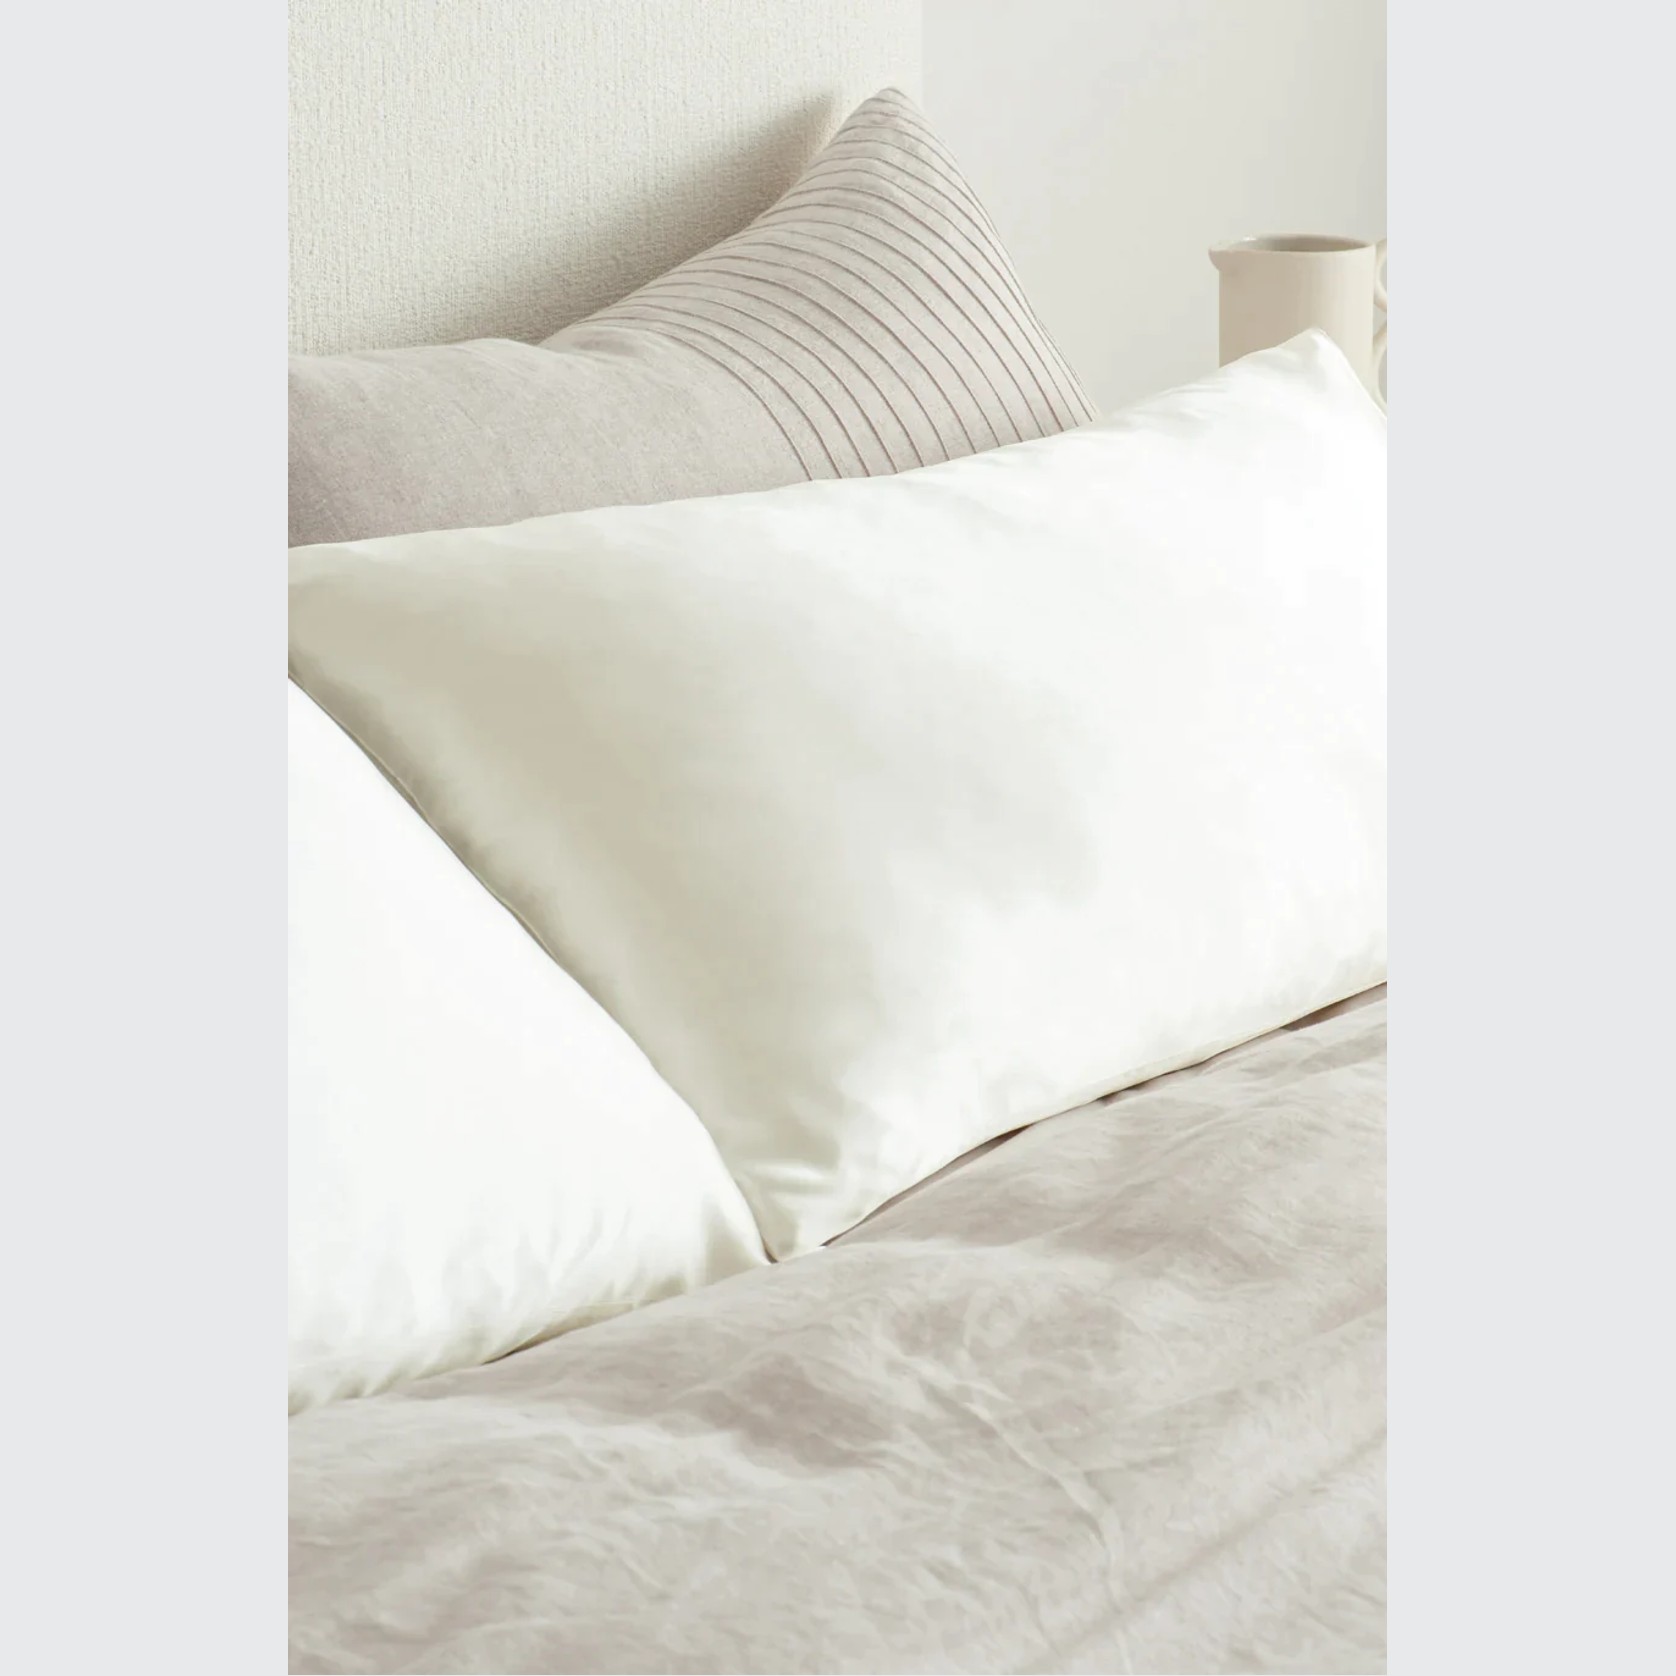 Silk Pillowcase with Gift Box - Pearl | Bianca Lorenne gallery detail image